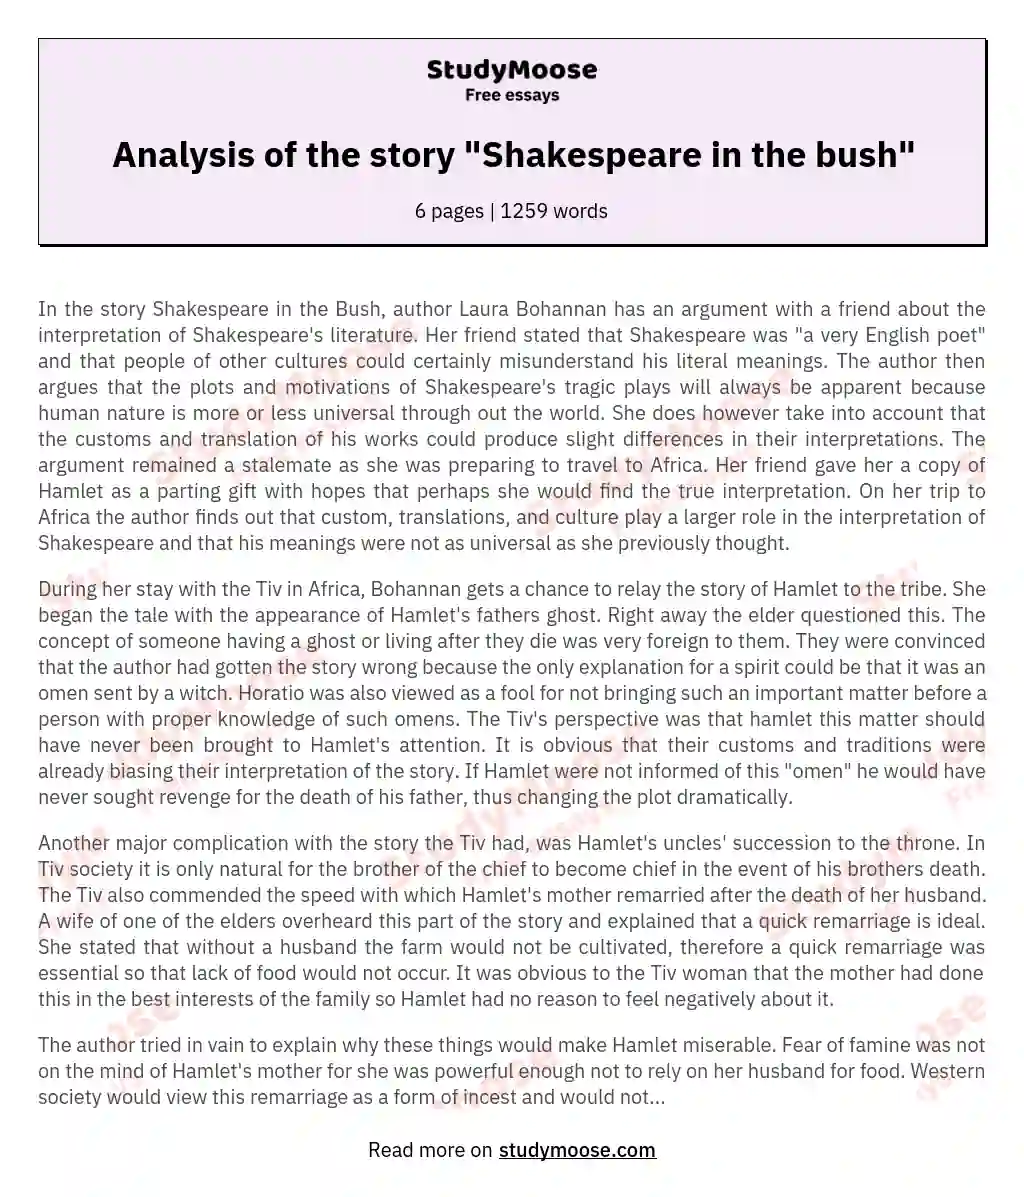 Analysis of the story "Shakespeare in the bush" essay